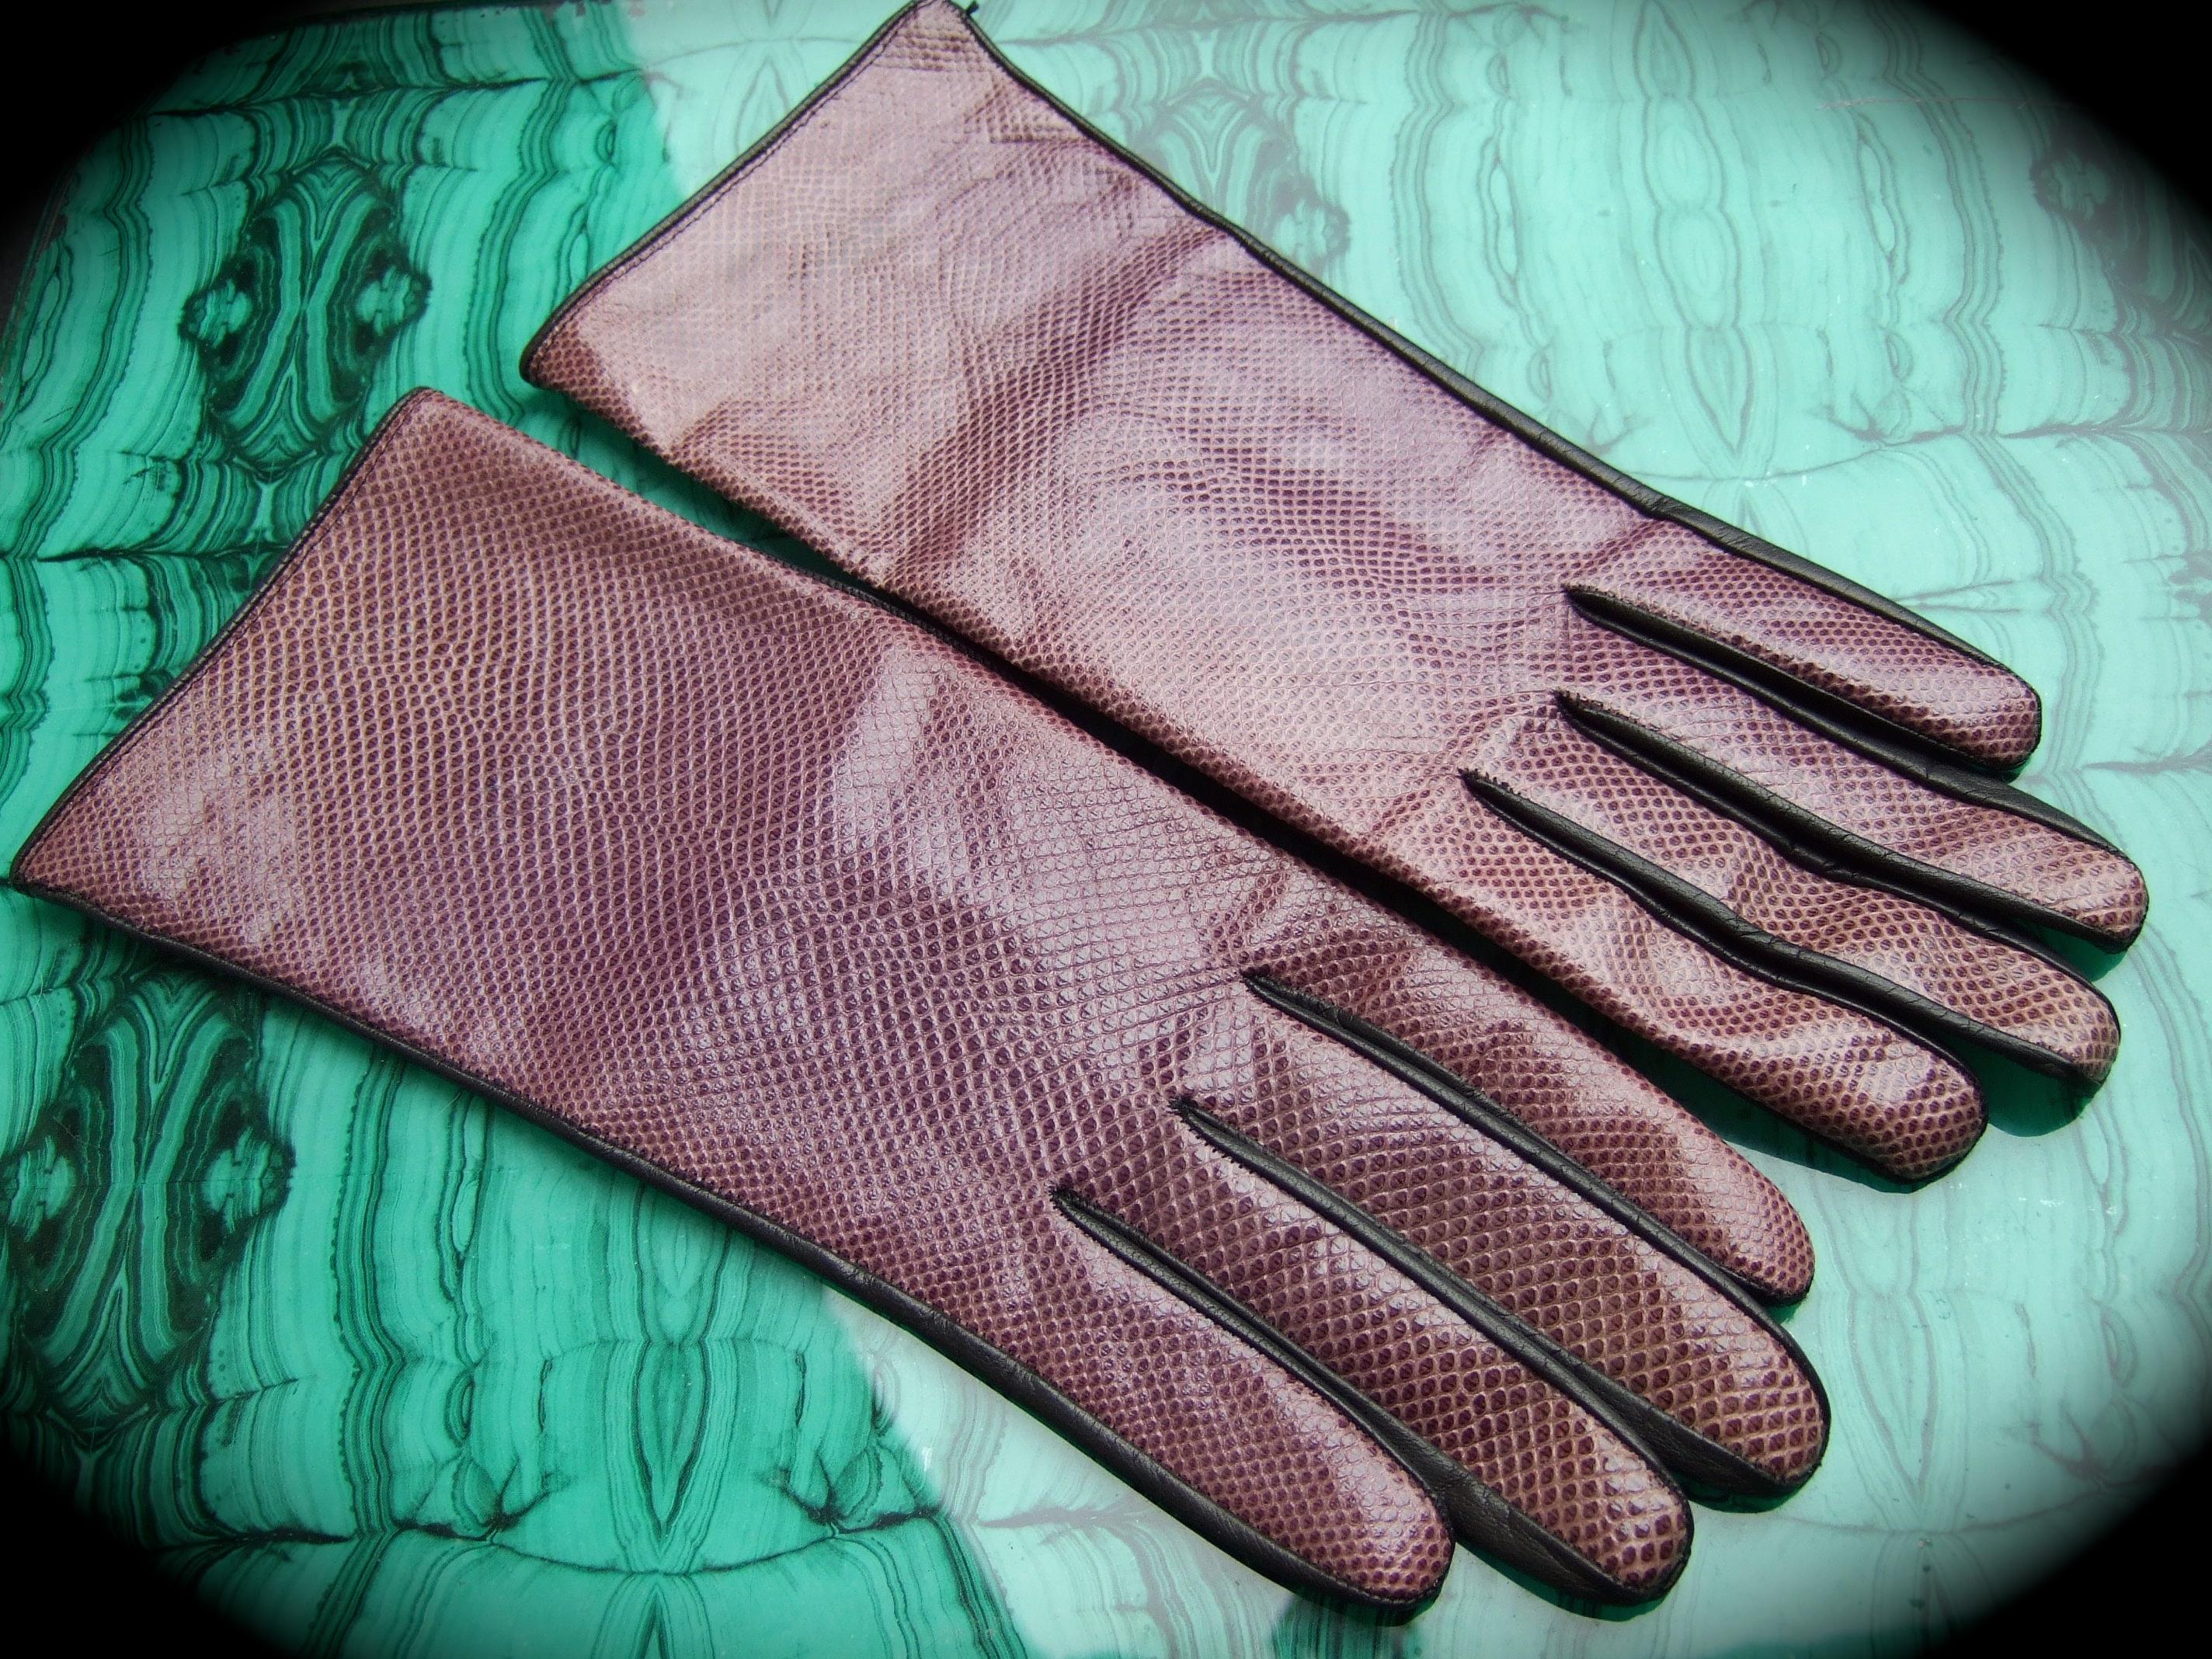 Yves Saint Laurent Chic embossed purple leather gloves c 1980s
The stylish gloves are designed with muted dark purple embossed leather that emulates reptile skin

The exterior underneath side is constructed with smooth black leather
The interior is